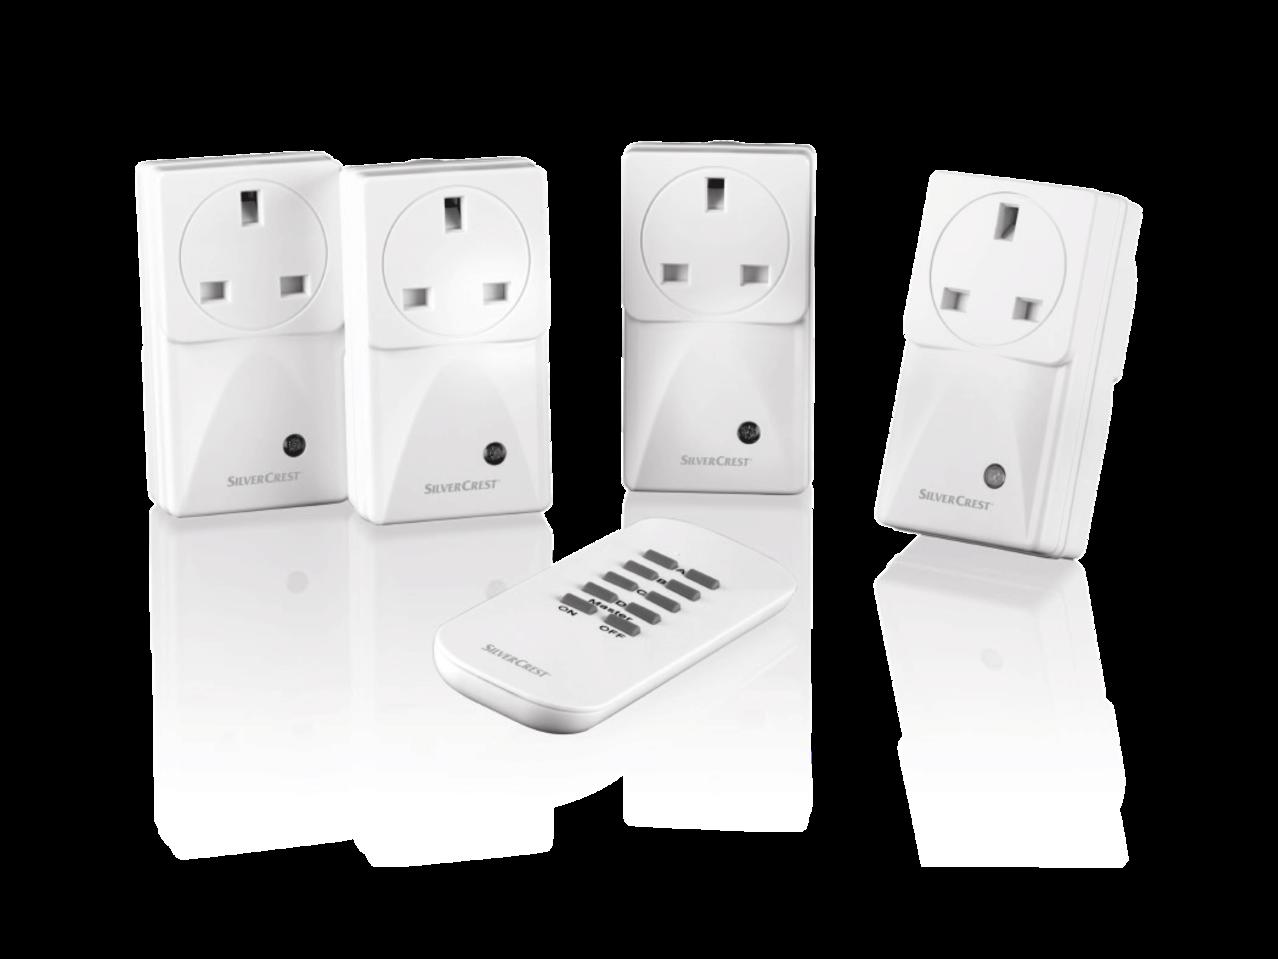 SILVERCREST Indoor Wireless Remote Controlled Sockets